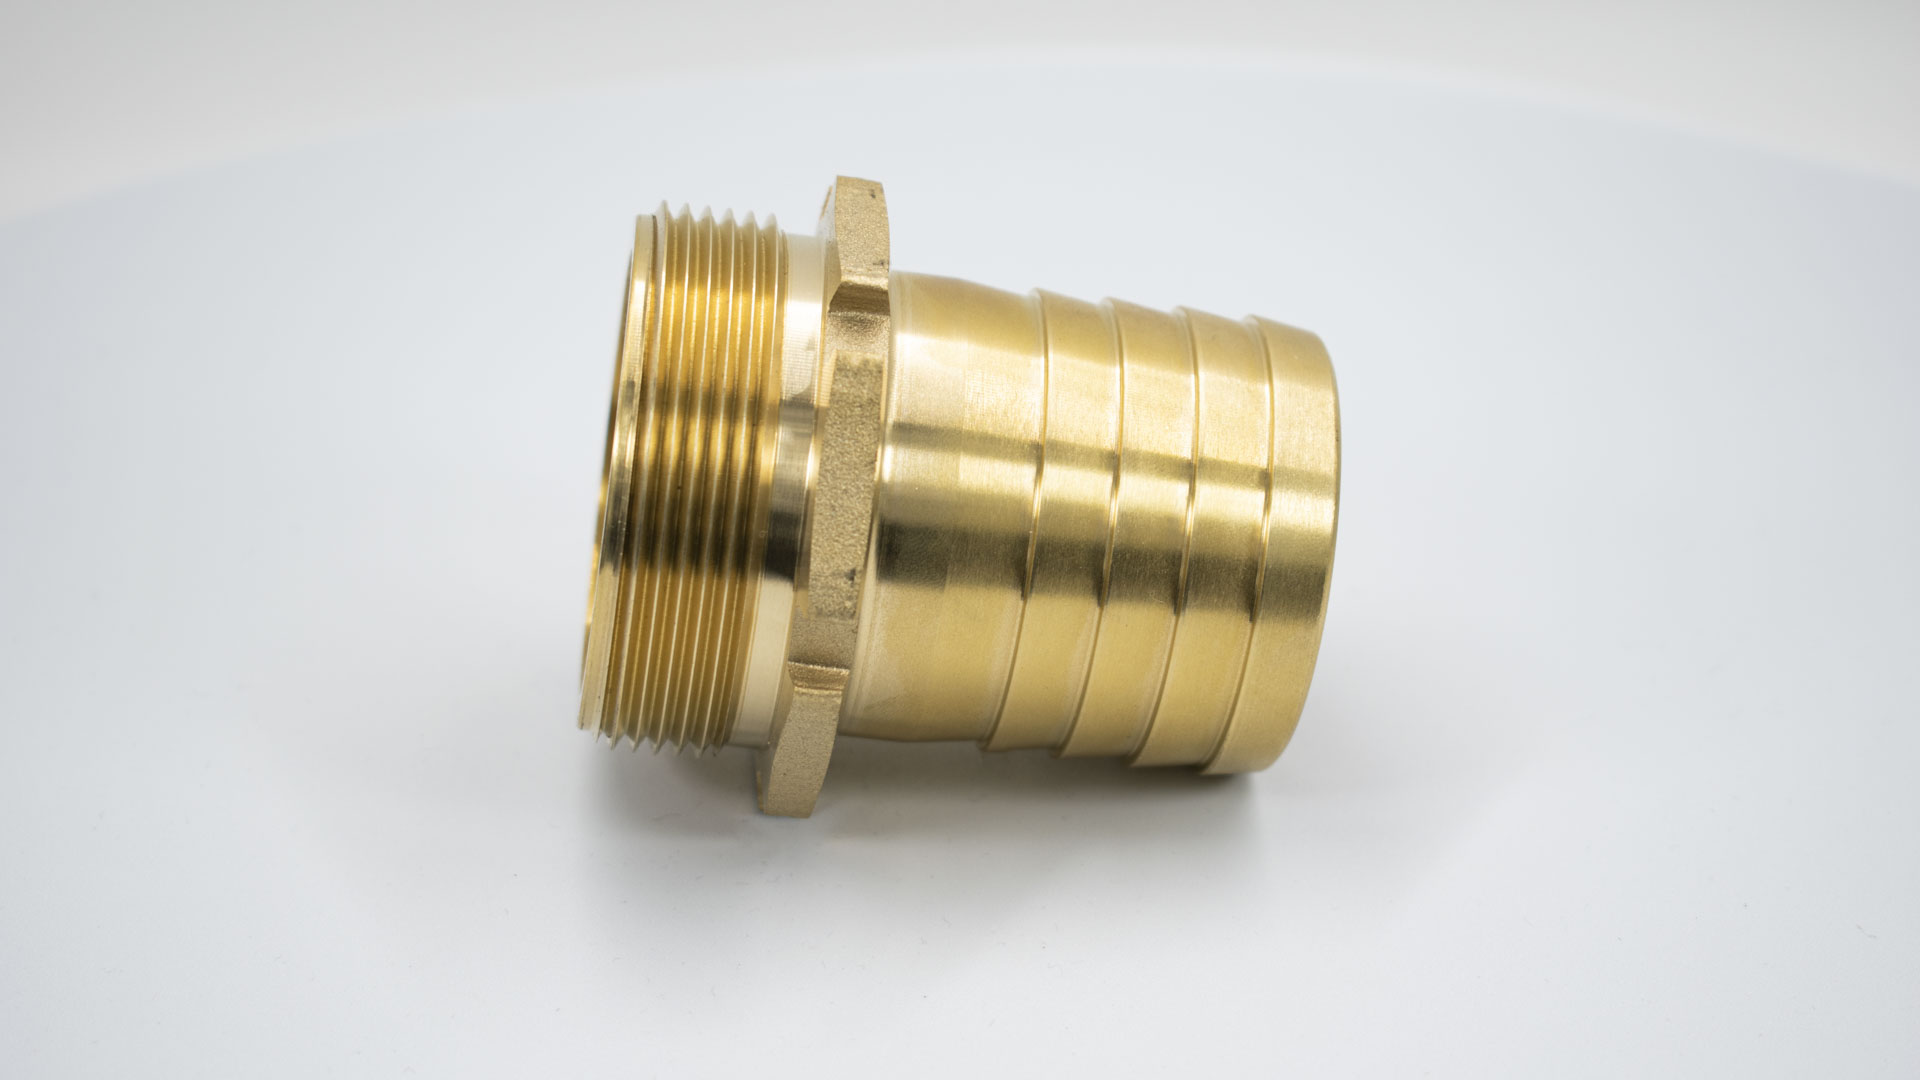 Brass hose connection with male coupling